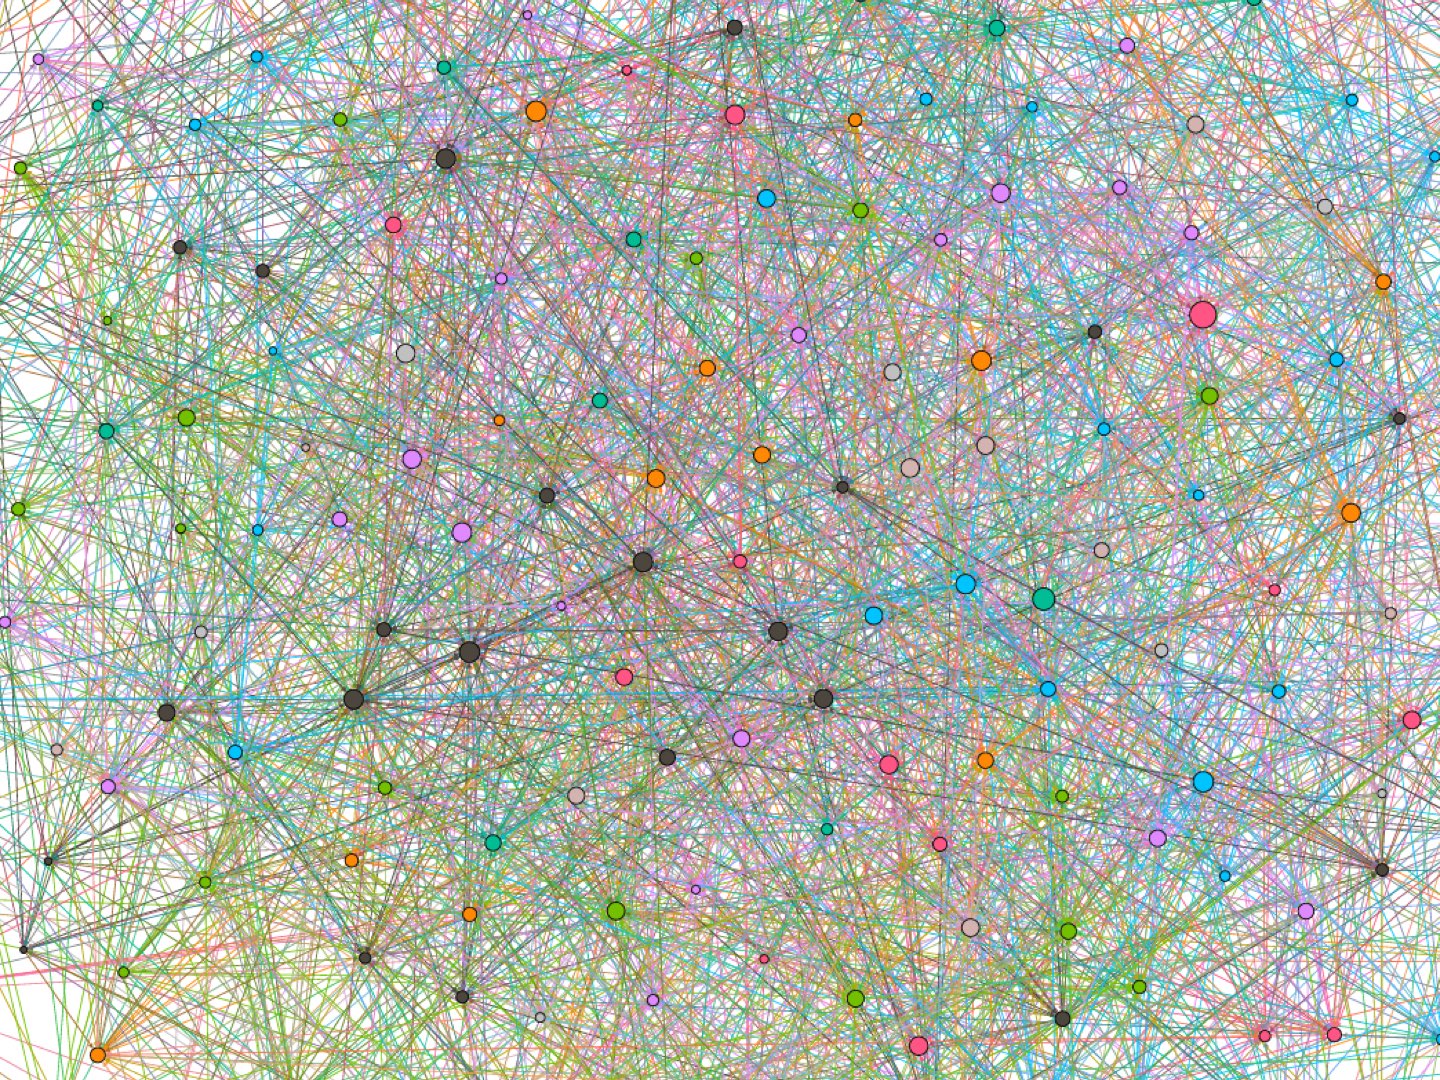 An illustration of lines and dots, representing the information acquired as “big data.”